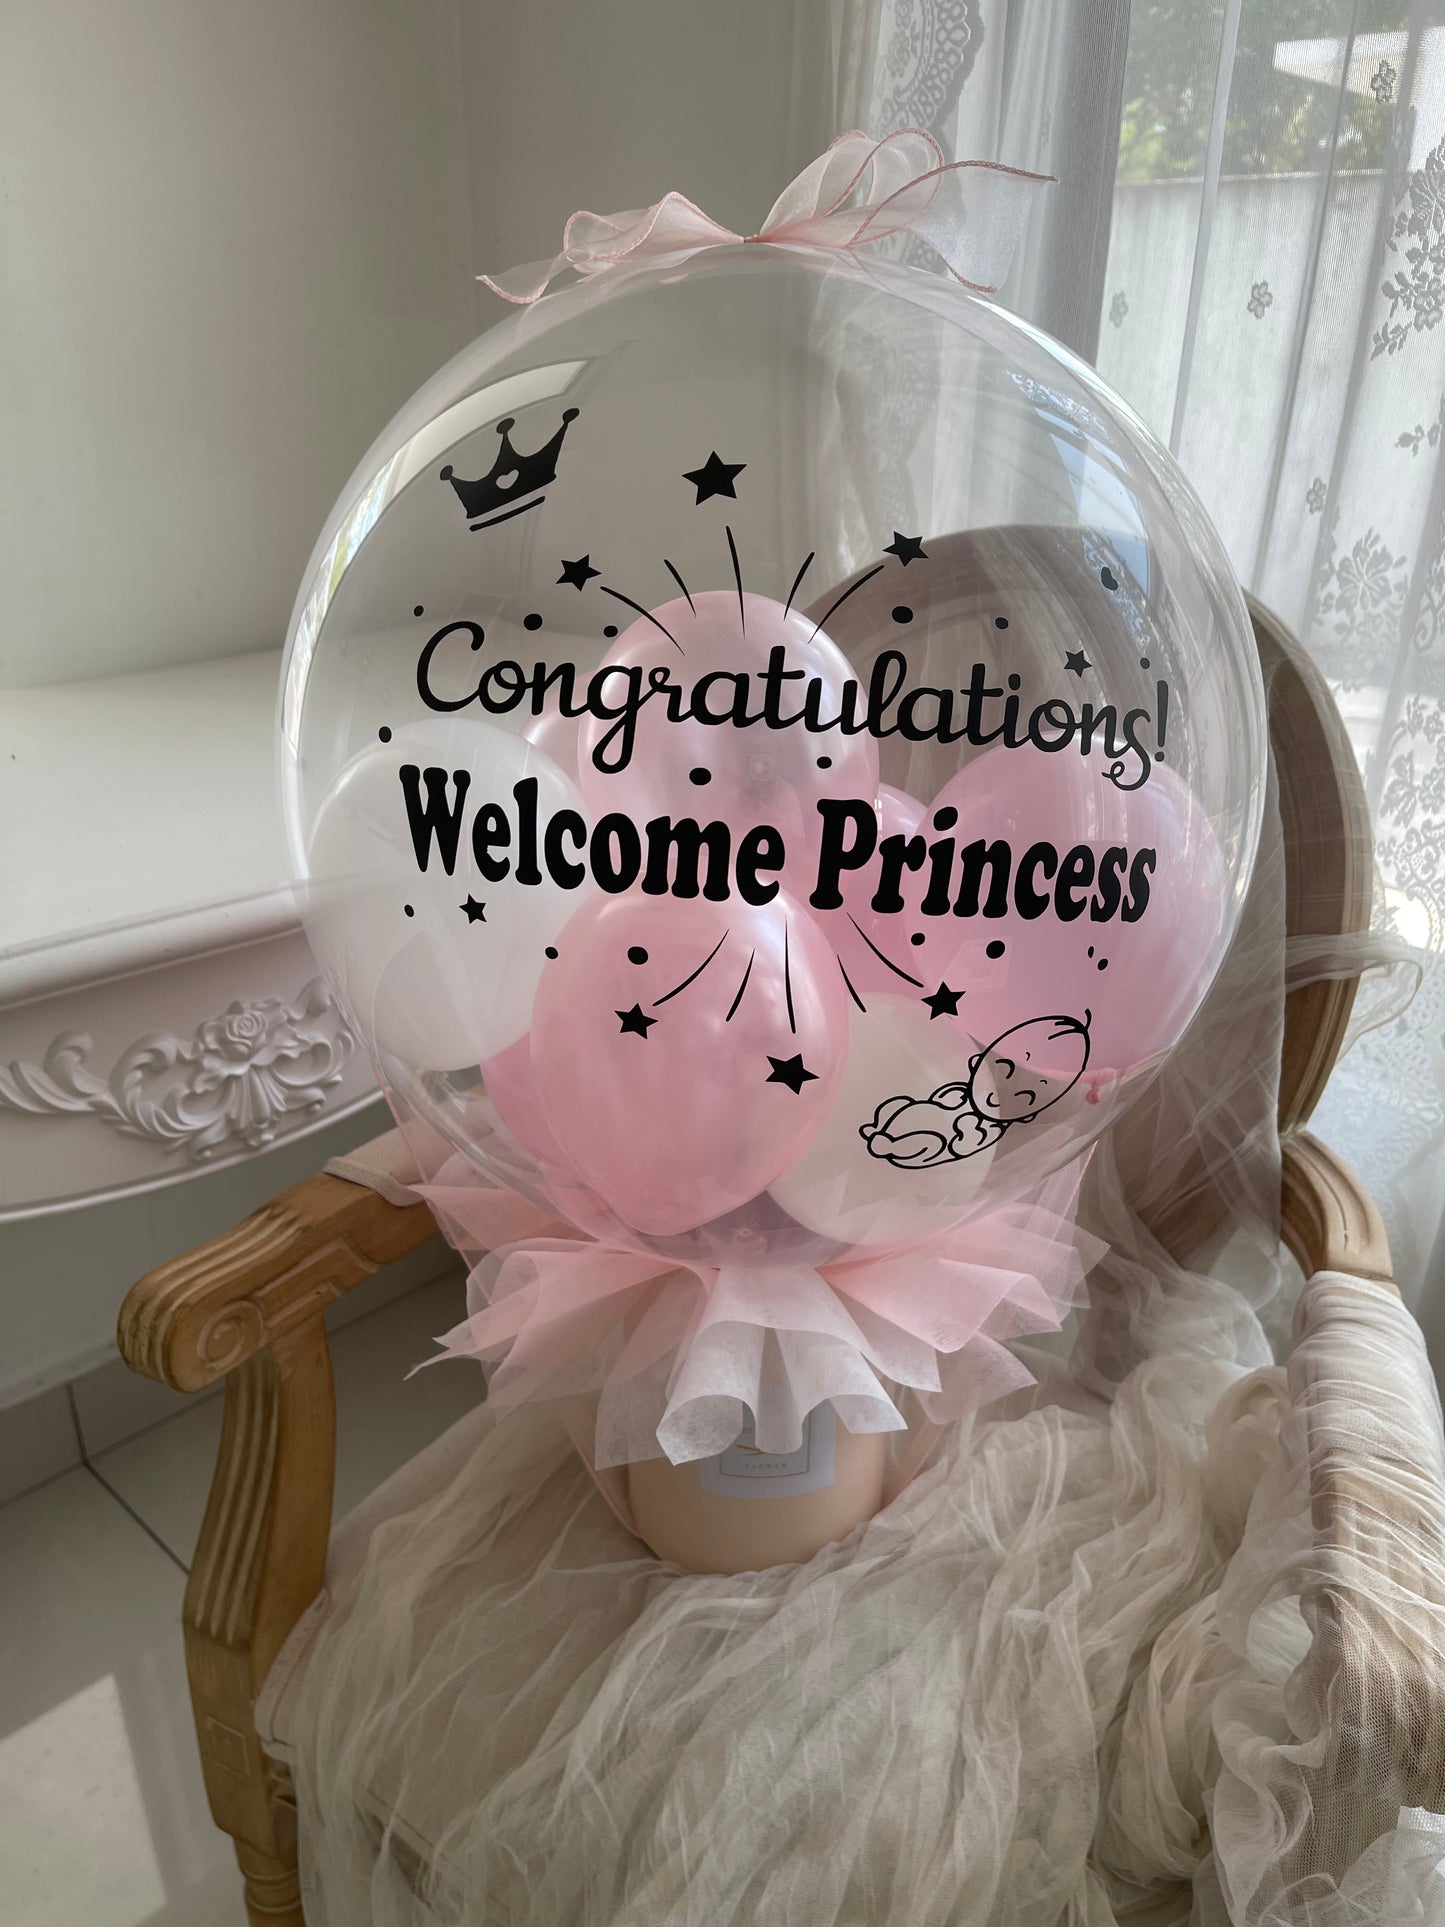 Congratulations and welcome baby girl